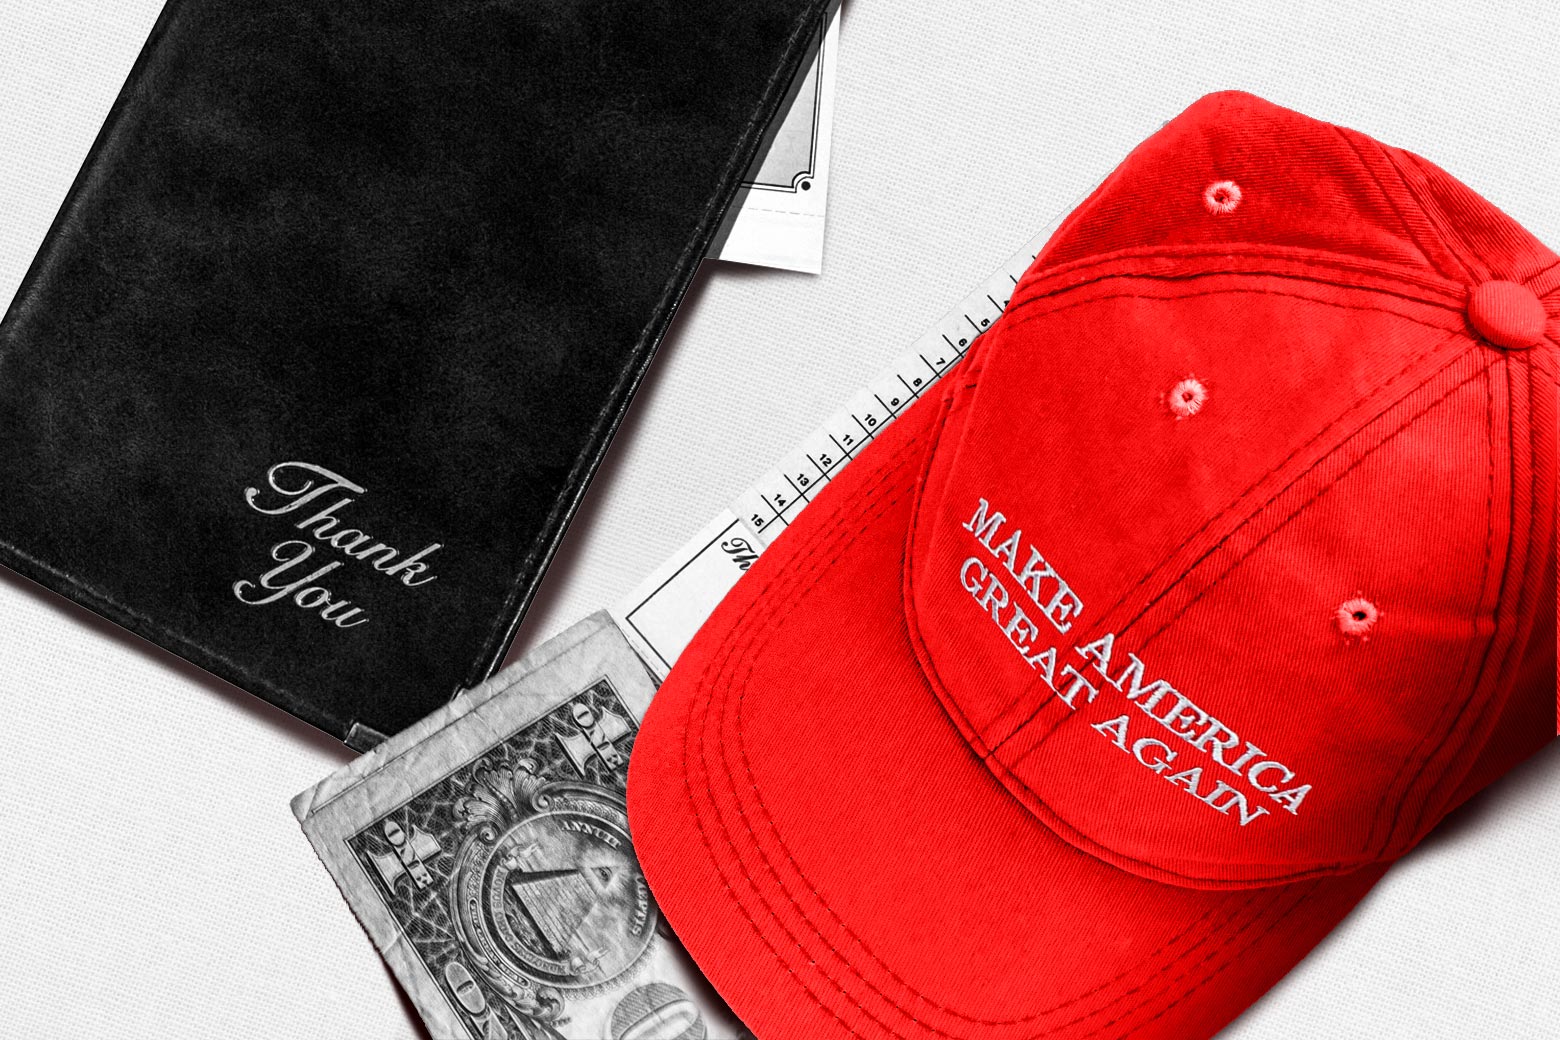 A red MAGA hat sitting on top of a restaurant bill and a one dollar tip next to a black leather bill presenter on a white tablecloth